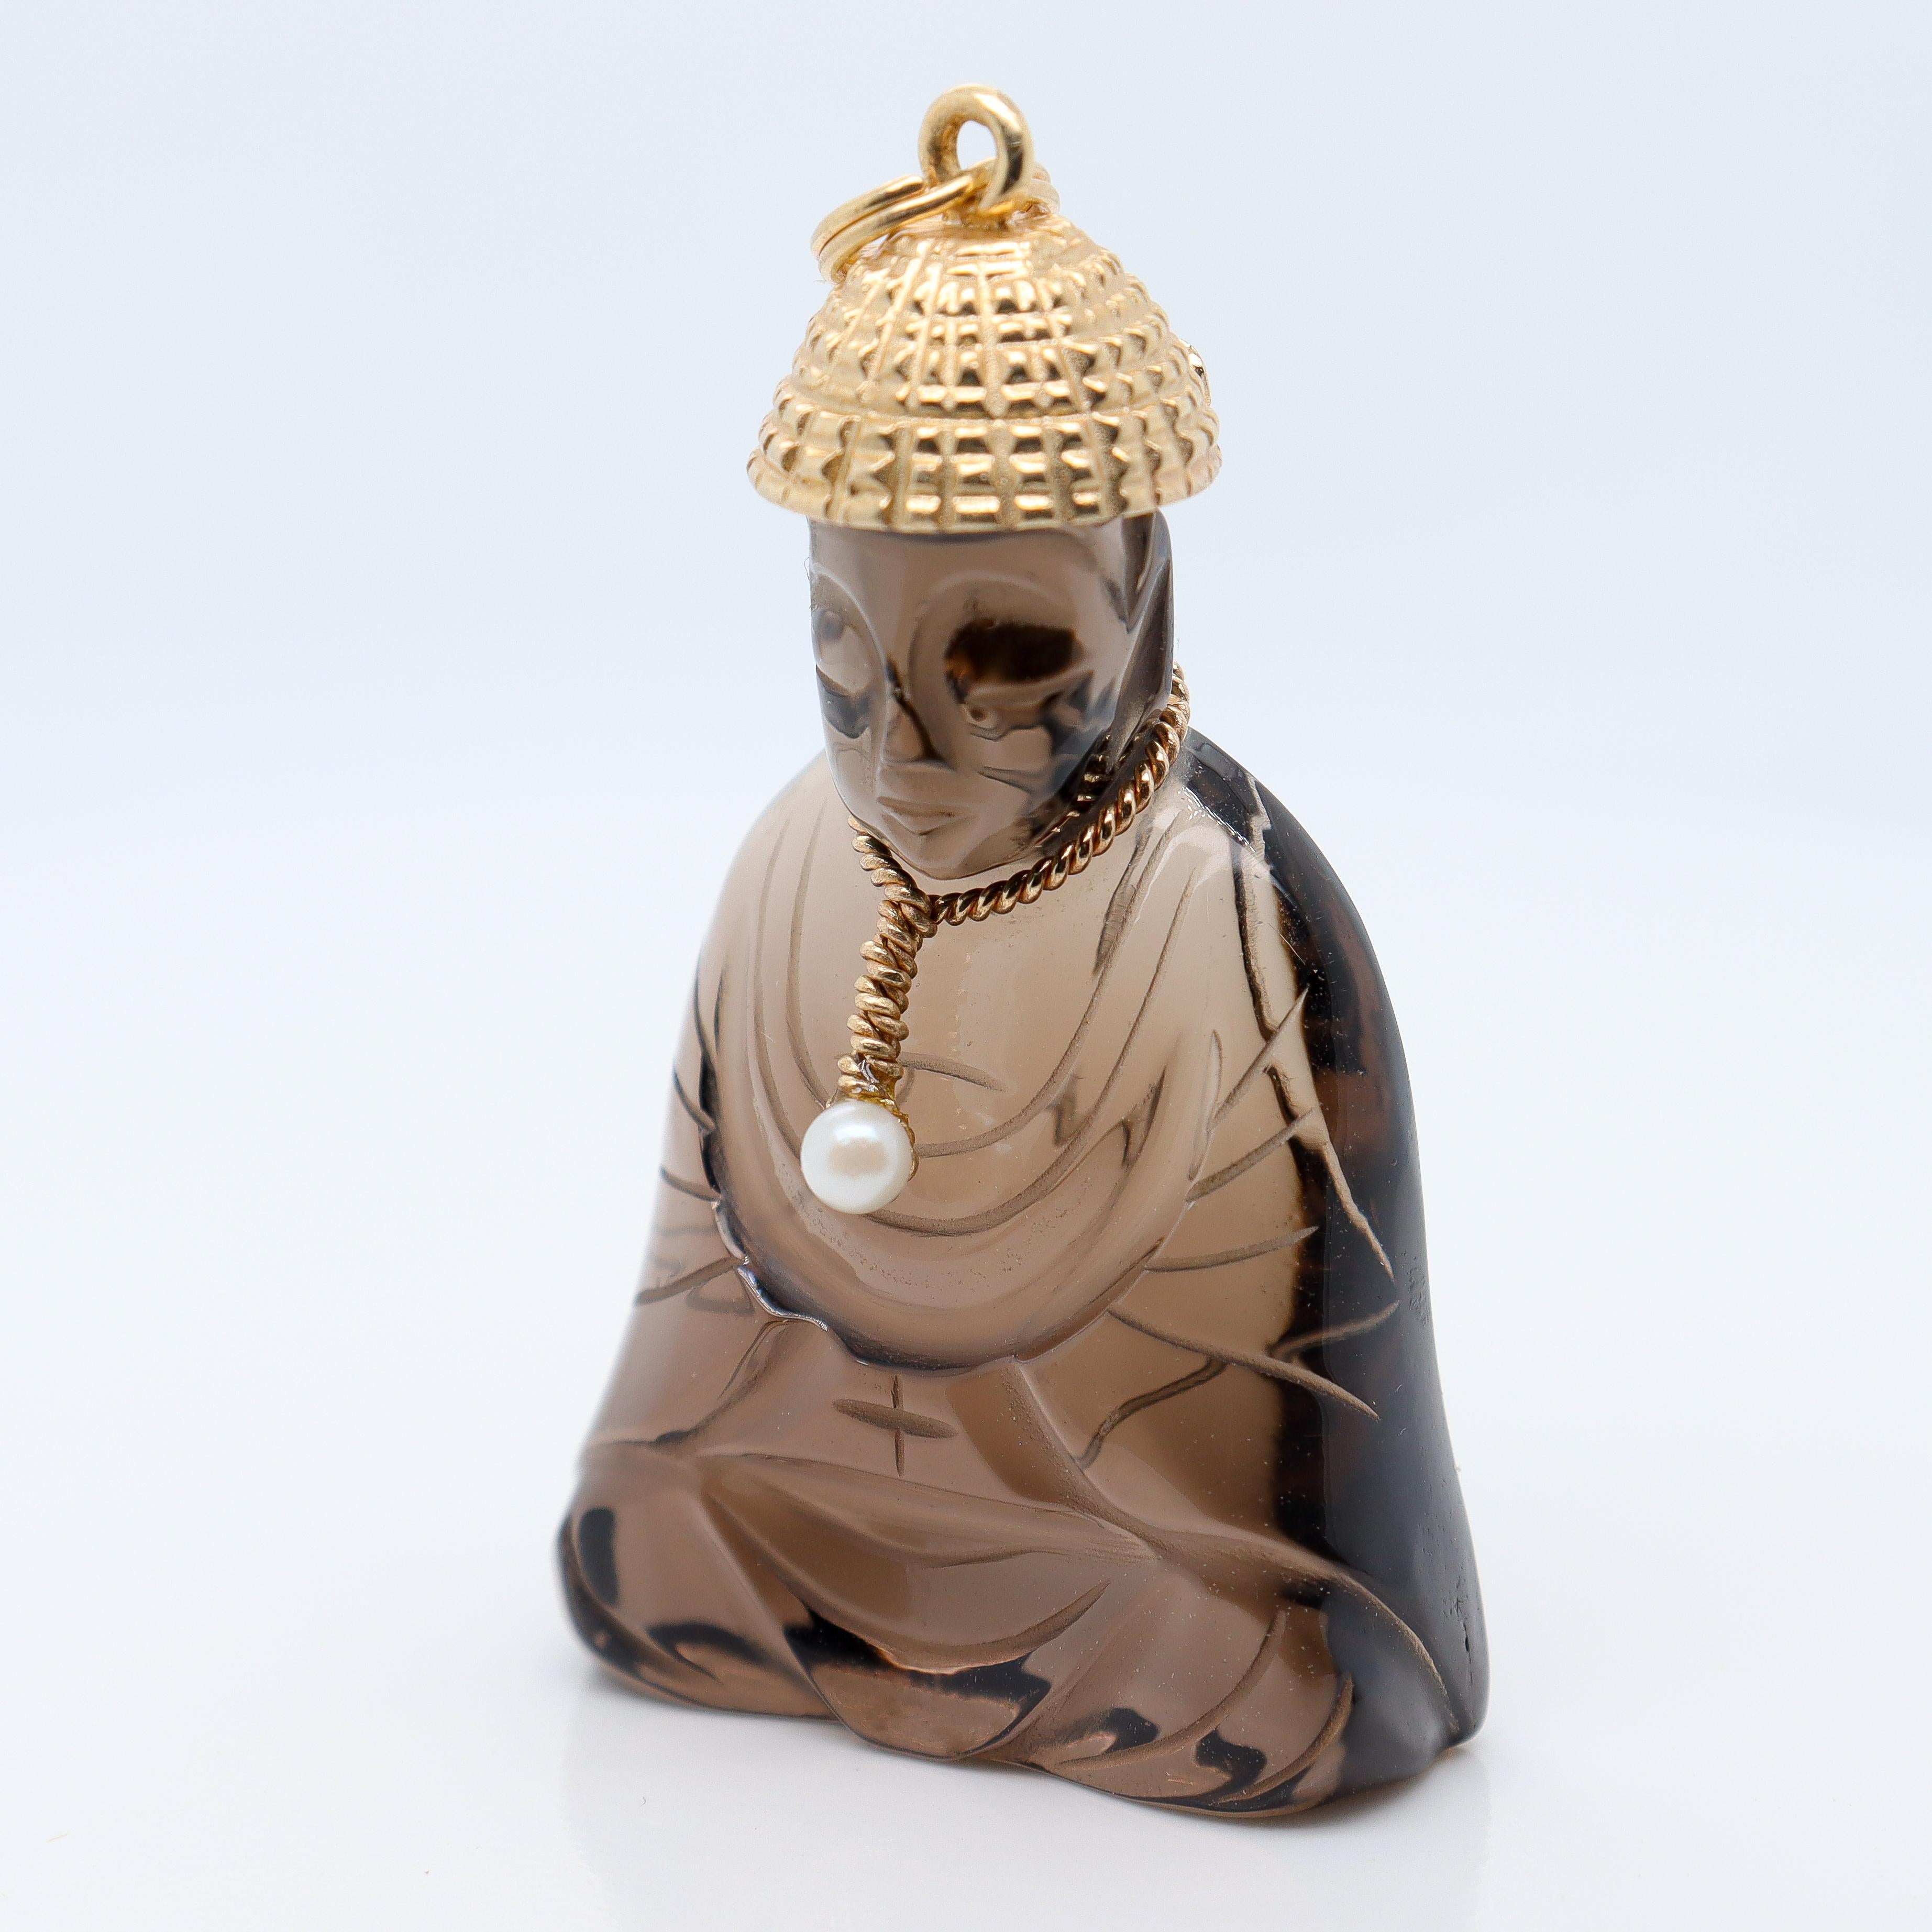 Retro Signed 14k Gold, Smoky Quartz, & Seed Pearl Carved Buddha Charm or Pendant For Sale 6